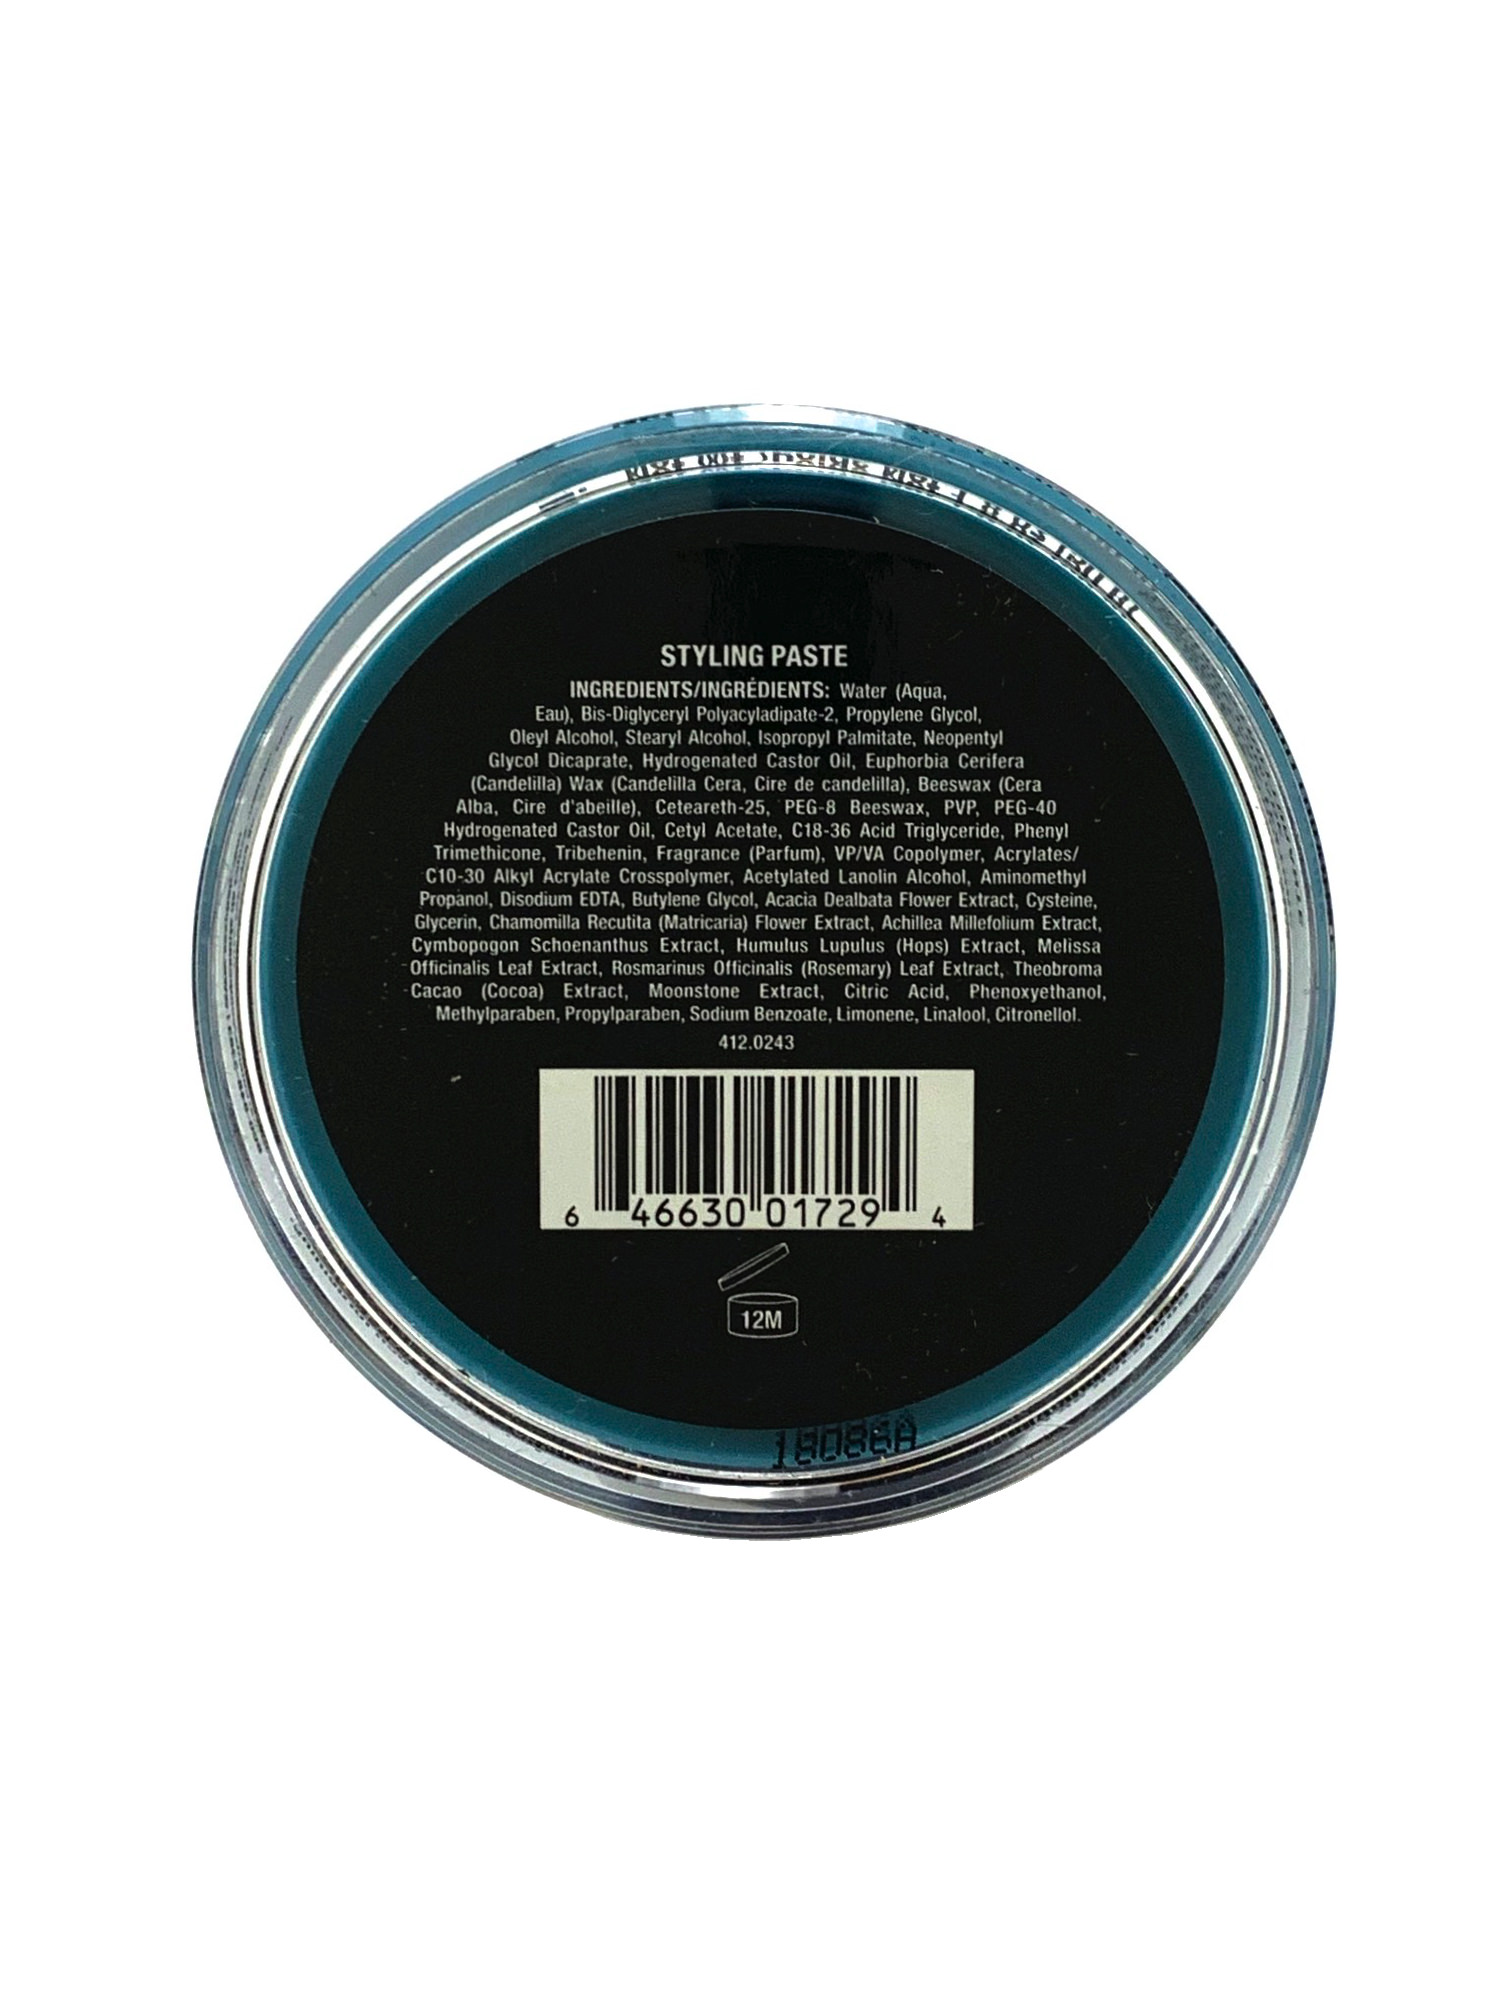 Sexy Hair Healthy Texturizing Hair Paste with Mimosa Flower Extract & Moon Stones, 1.8 oz - Travel Size - image 2 of 3